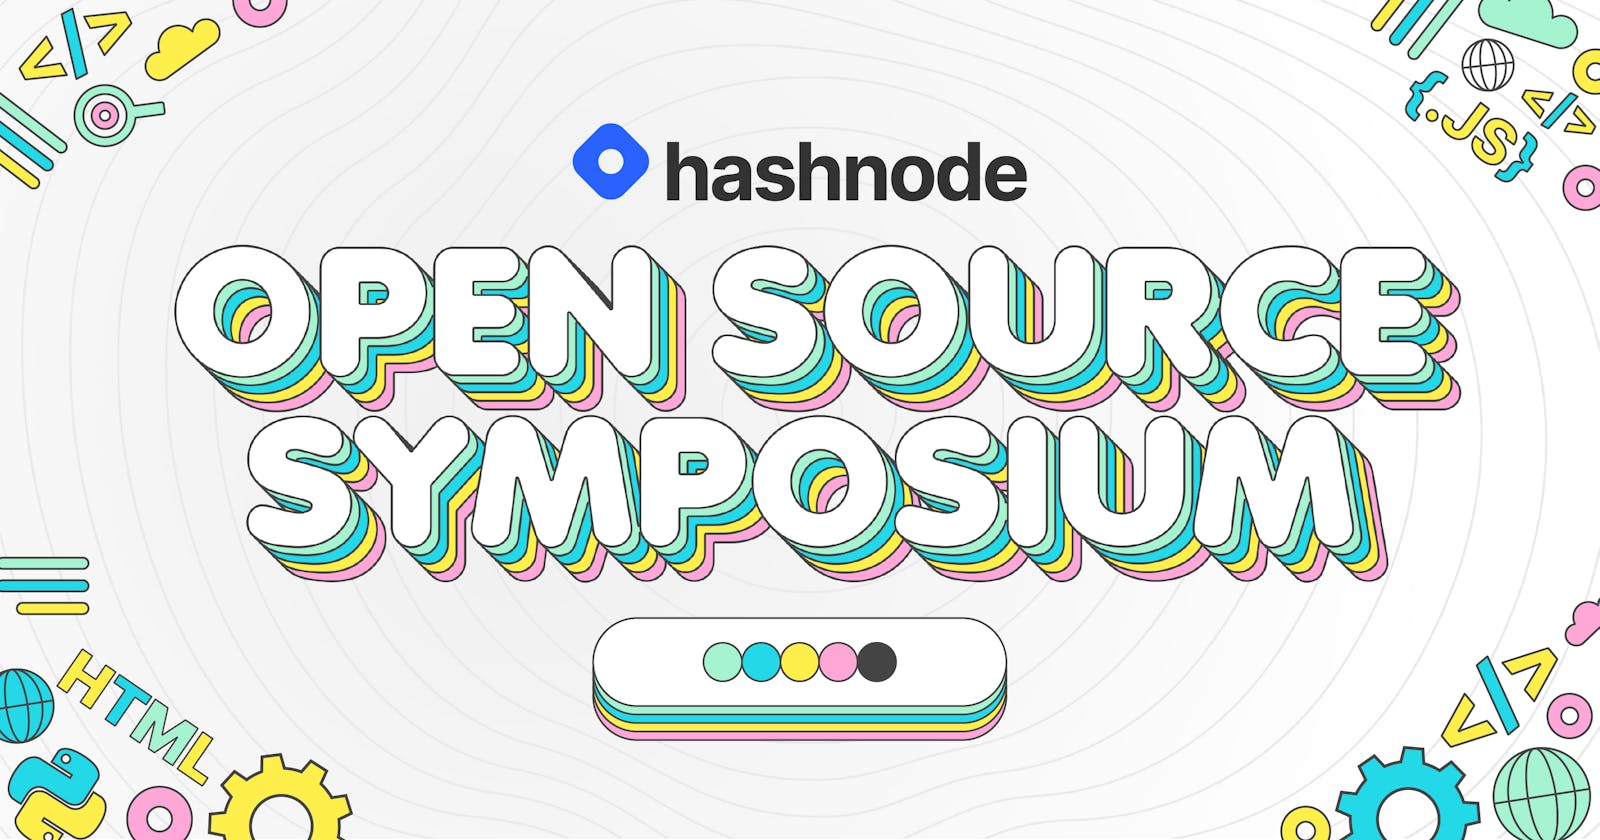 Announcing Hashnode Open Source October - The Symposium, Grants, and New Badges! 🚀